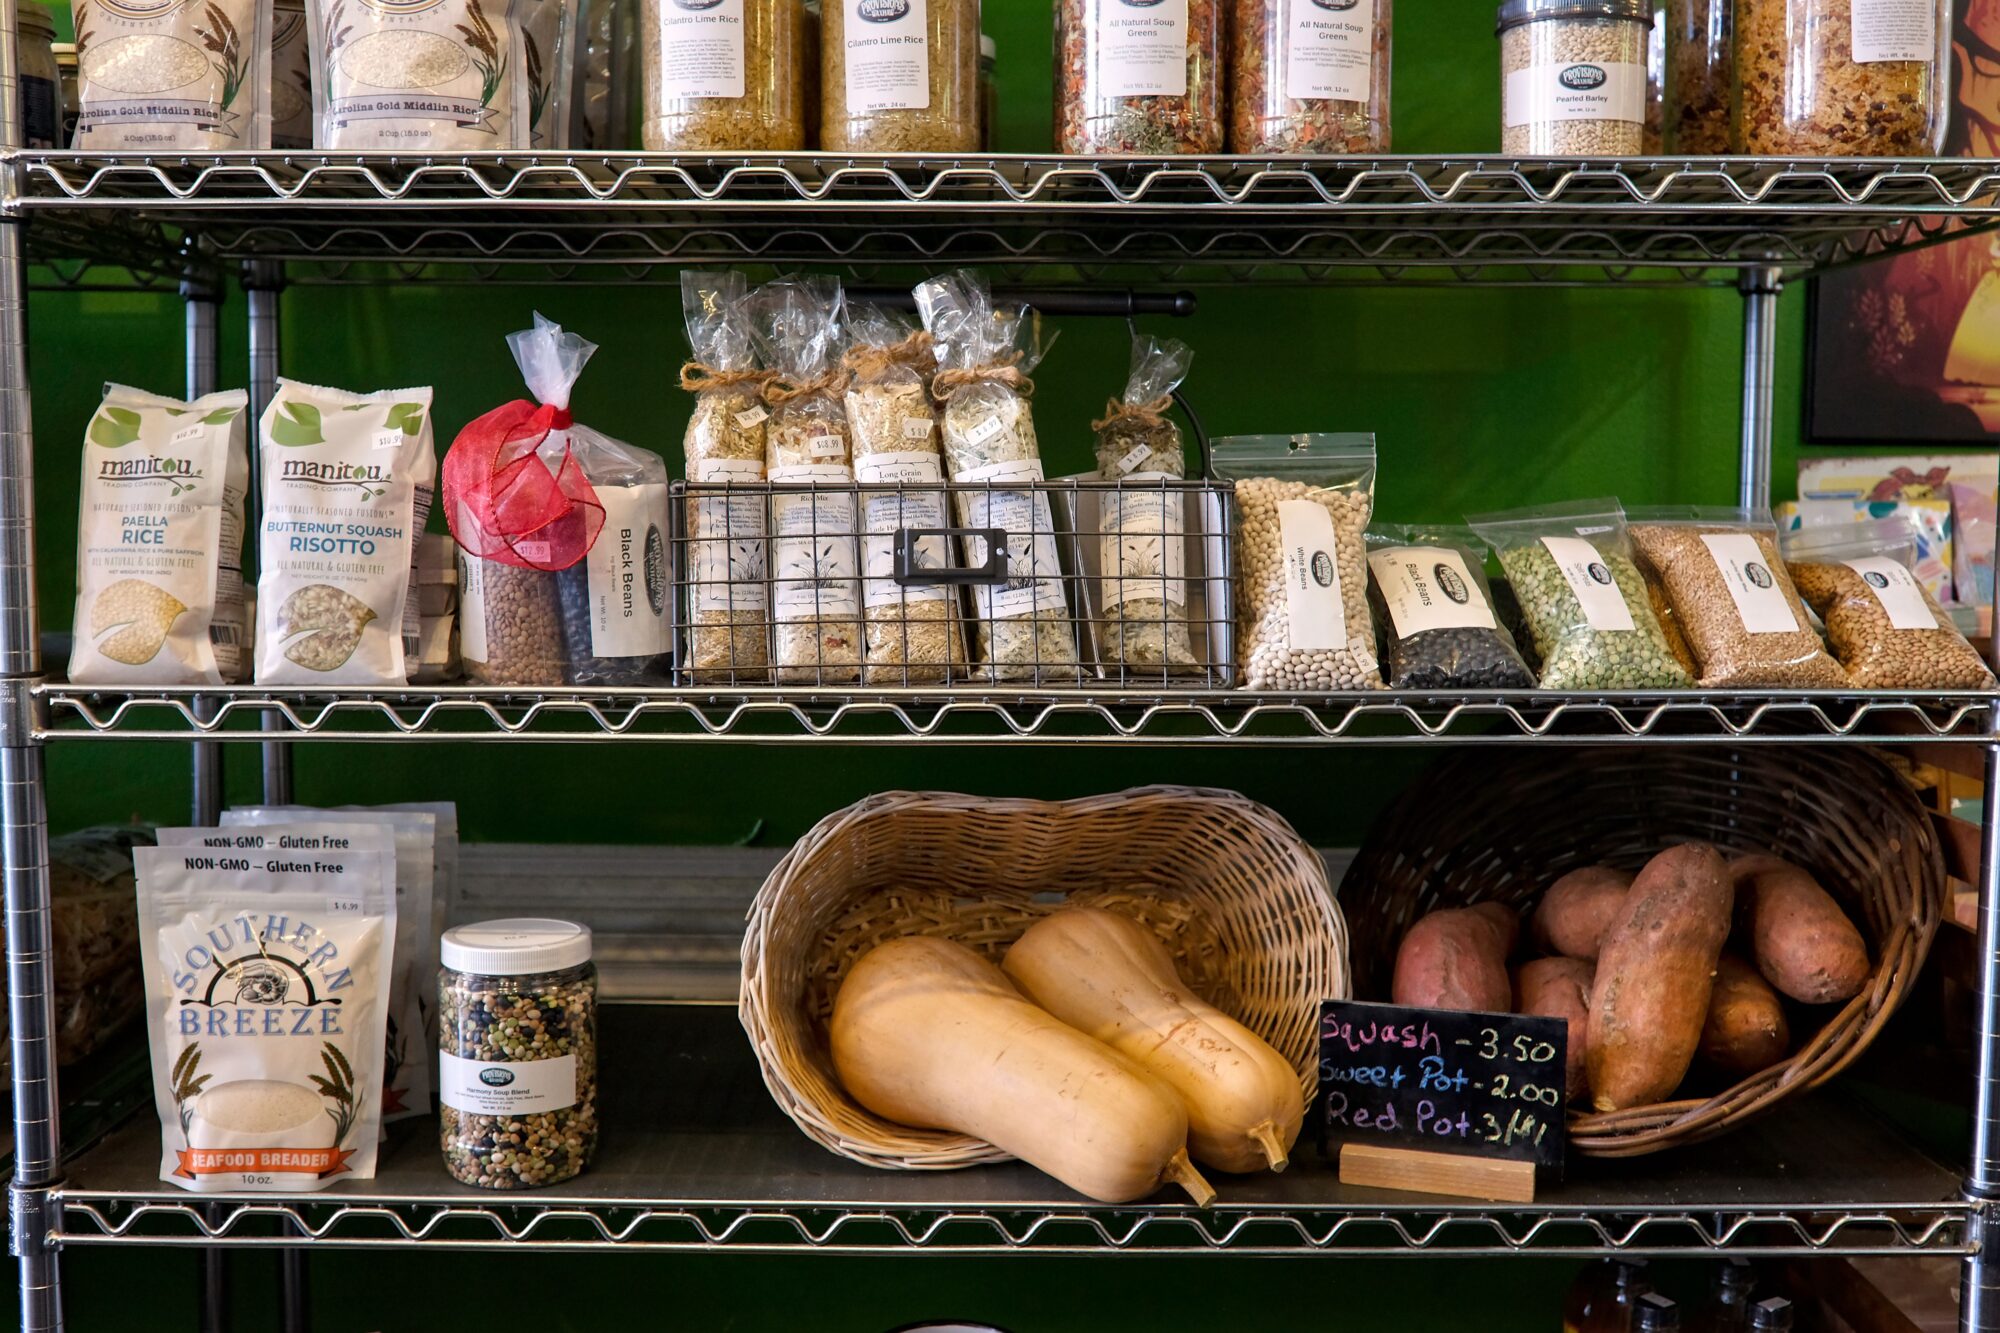 A shelf of produce and grains for sale at Provisions on Main